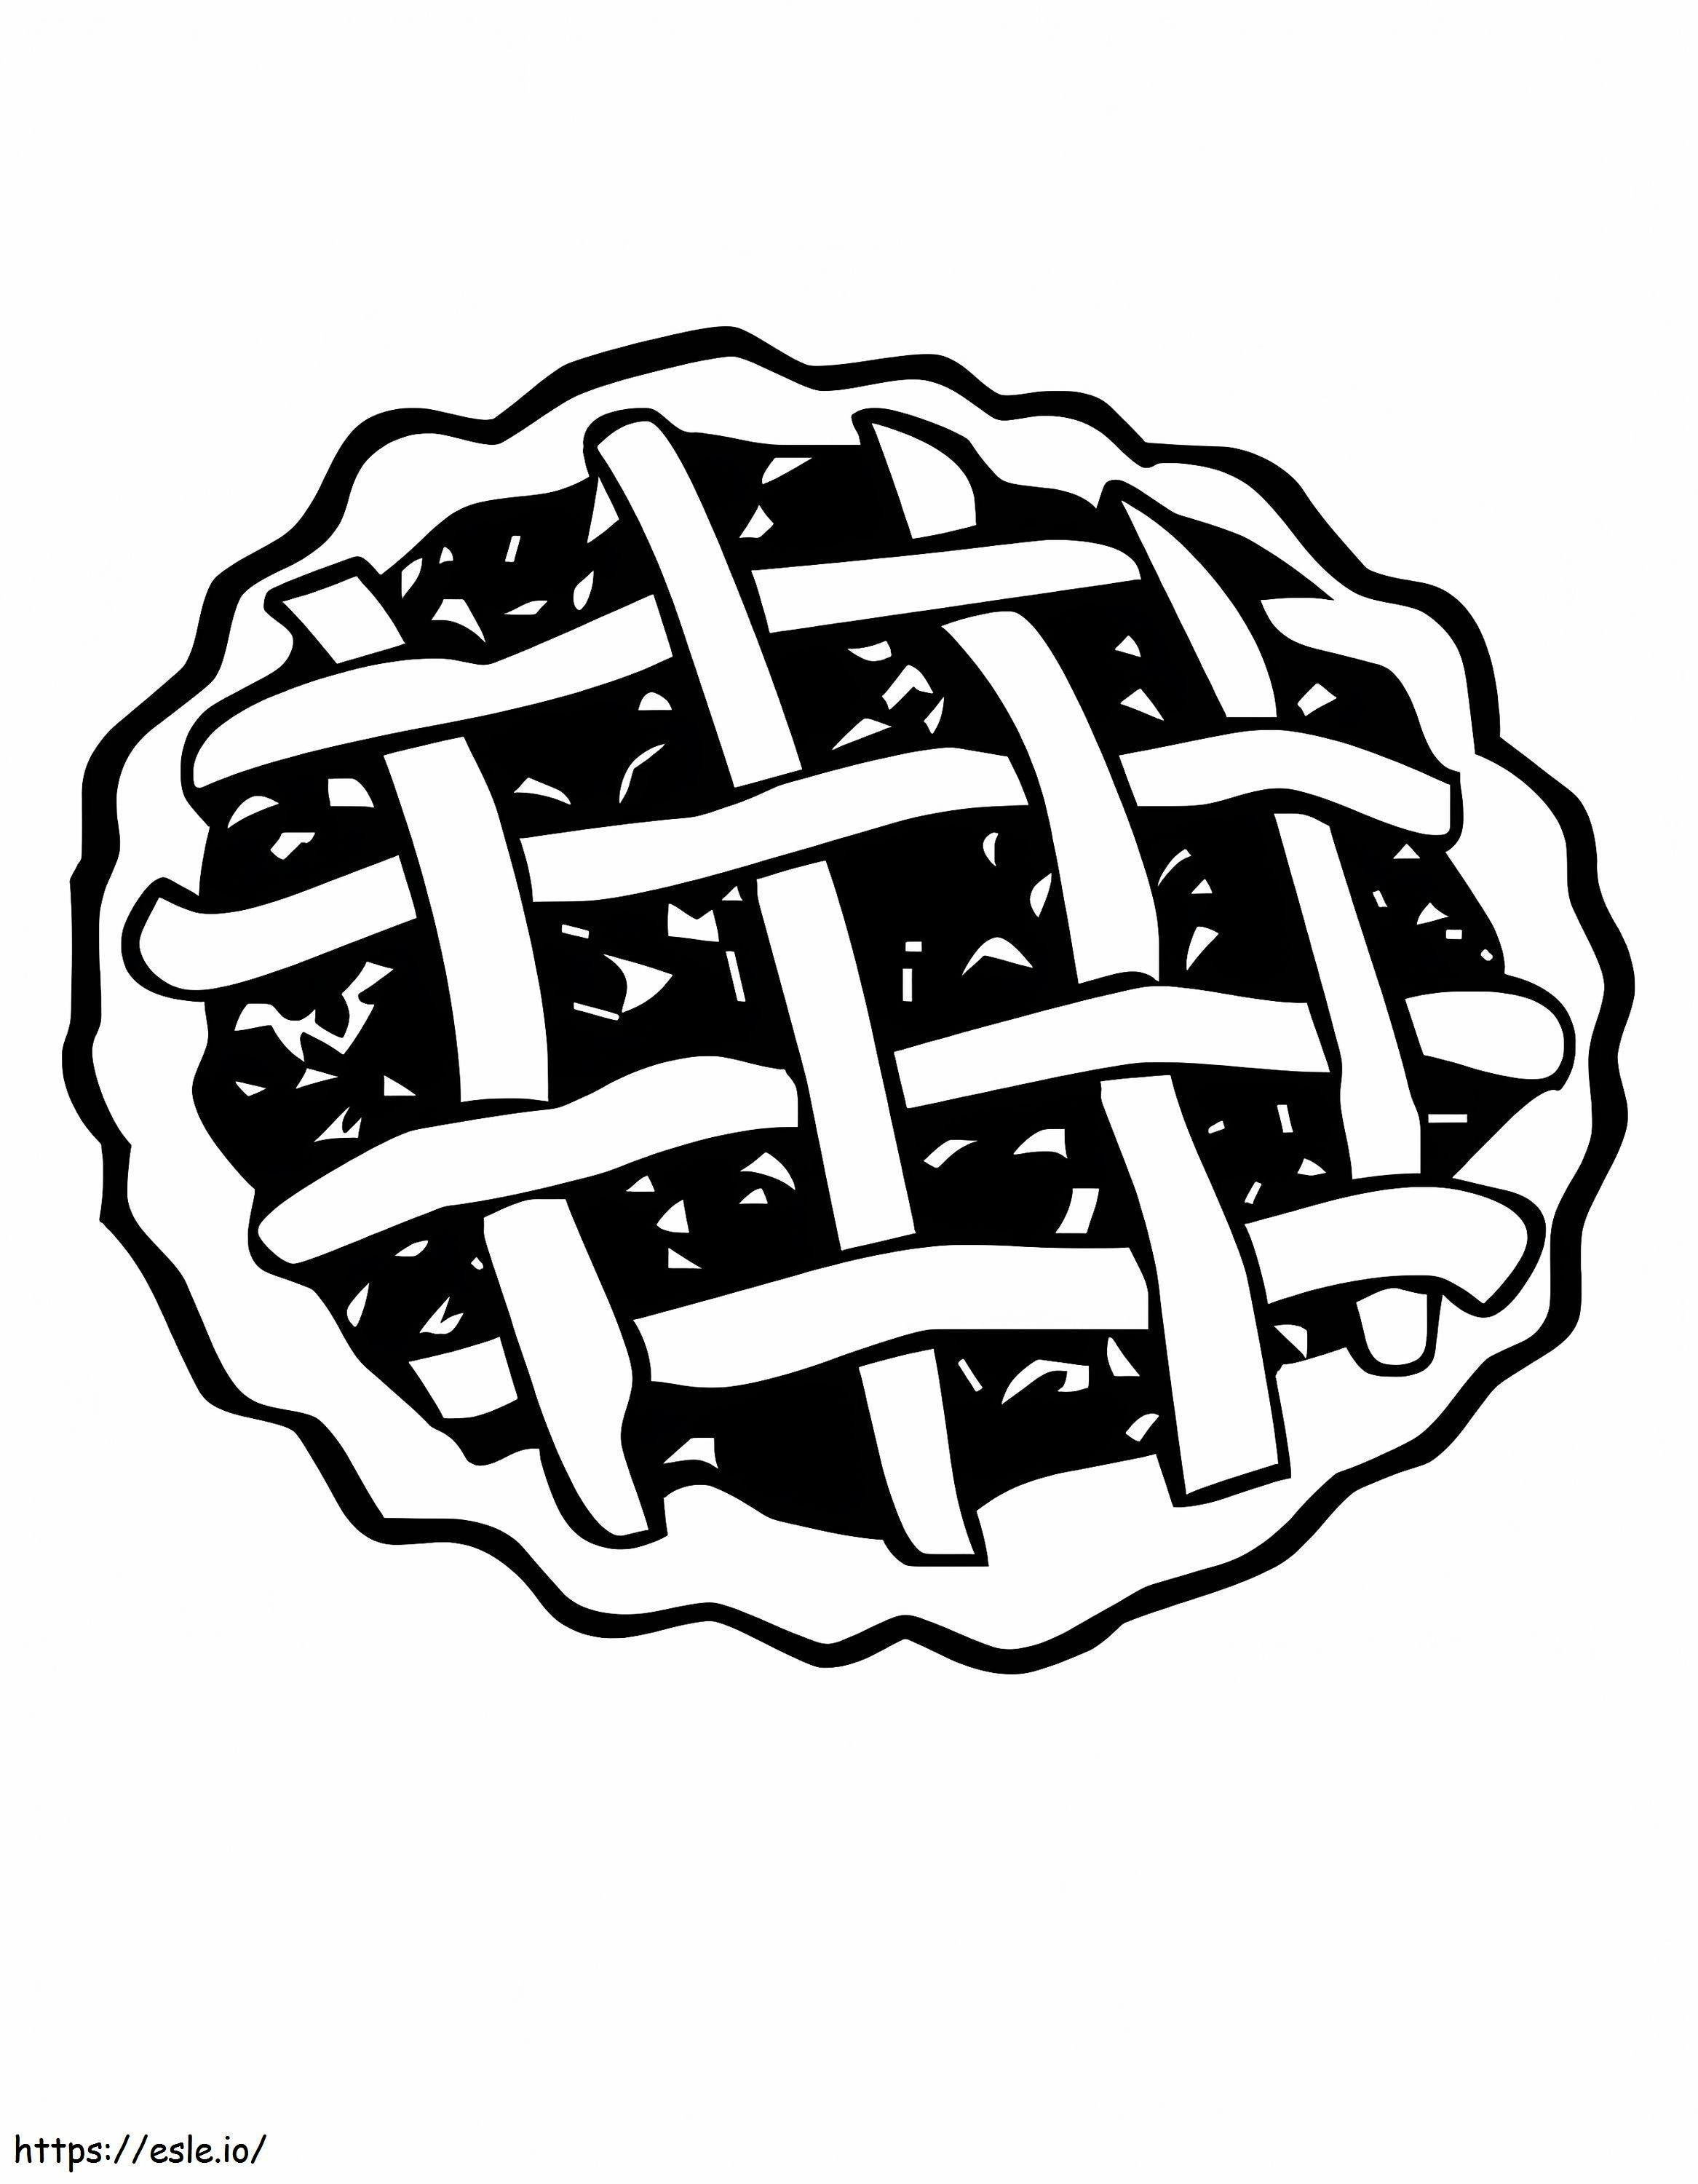 Fruit Pie coloring page